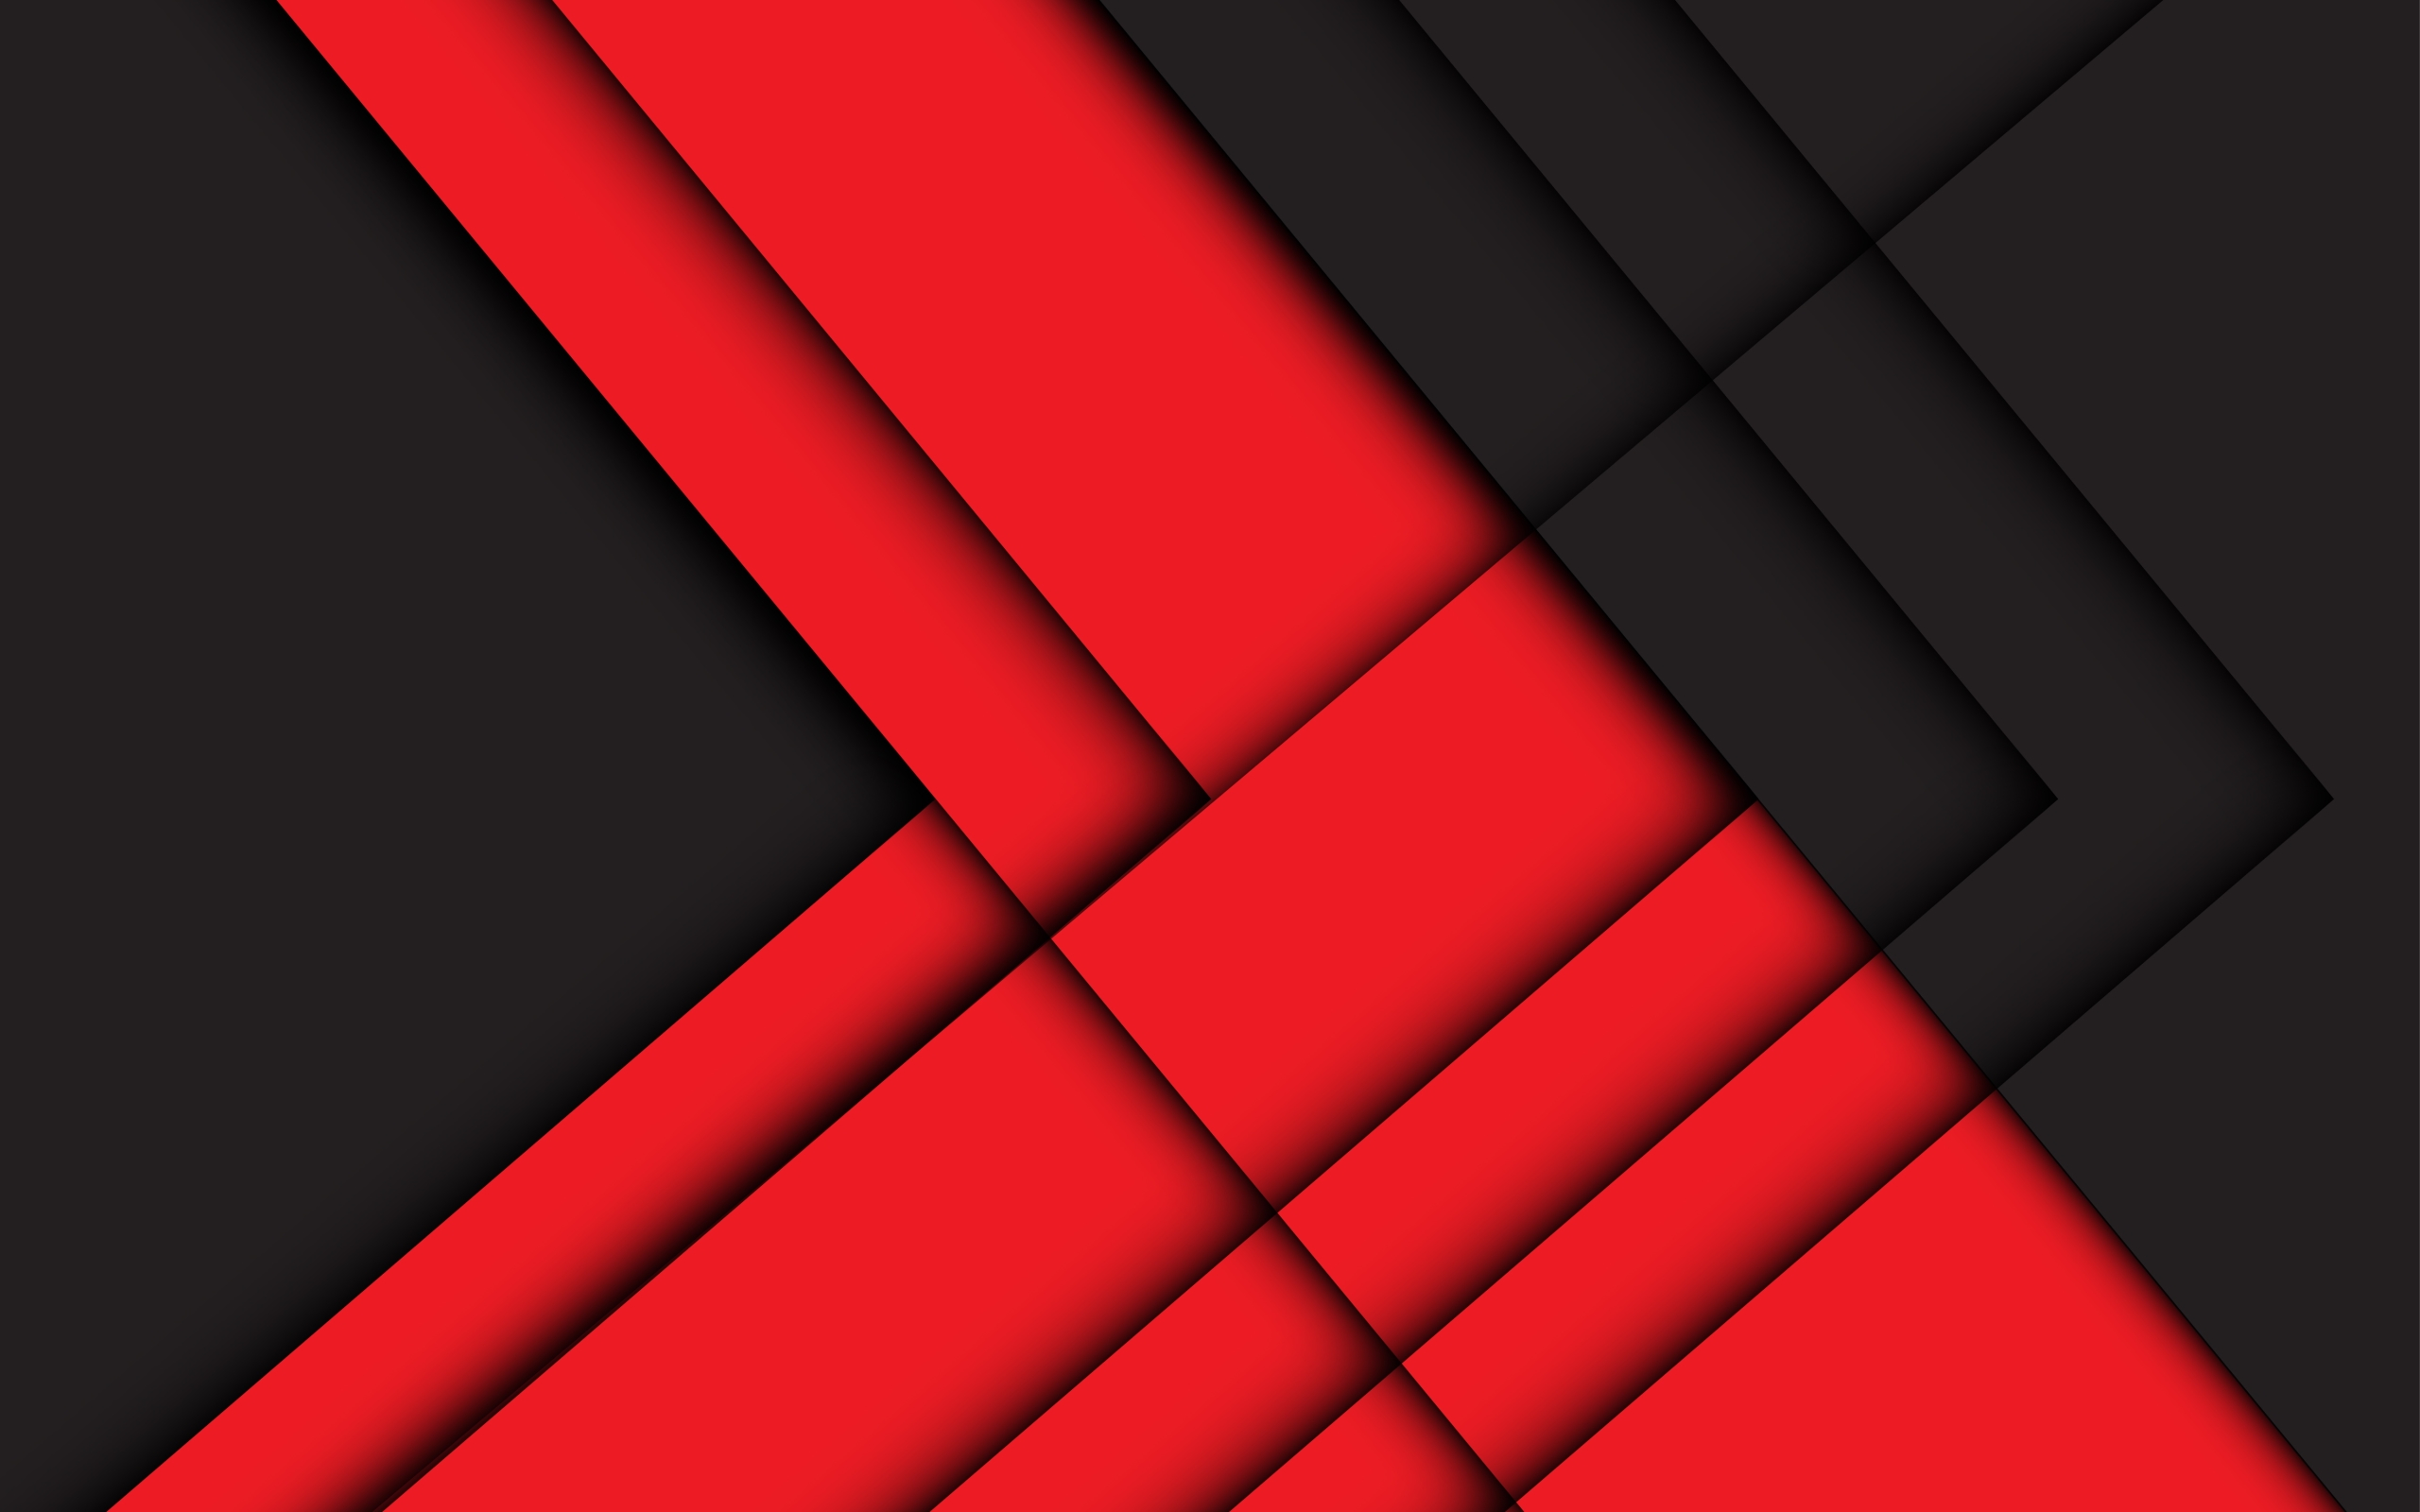 Wallpaper Of Artistic, Black, Geometry, Red, Shapes - Geometric Shapes  Background Hd - 2560x1600 Wallpaper 